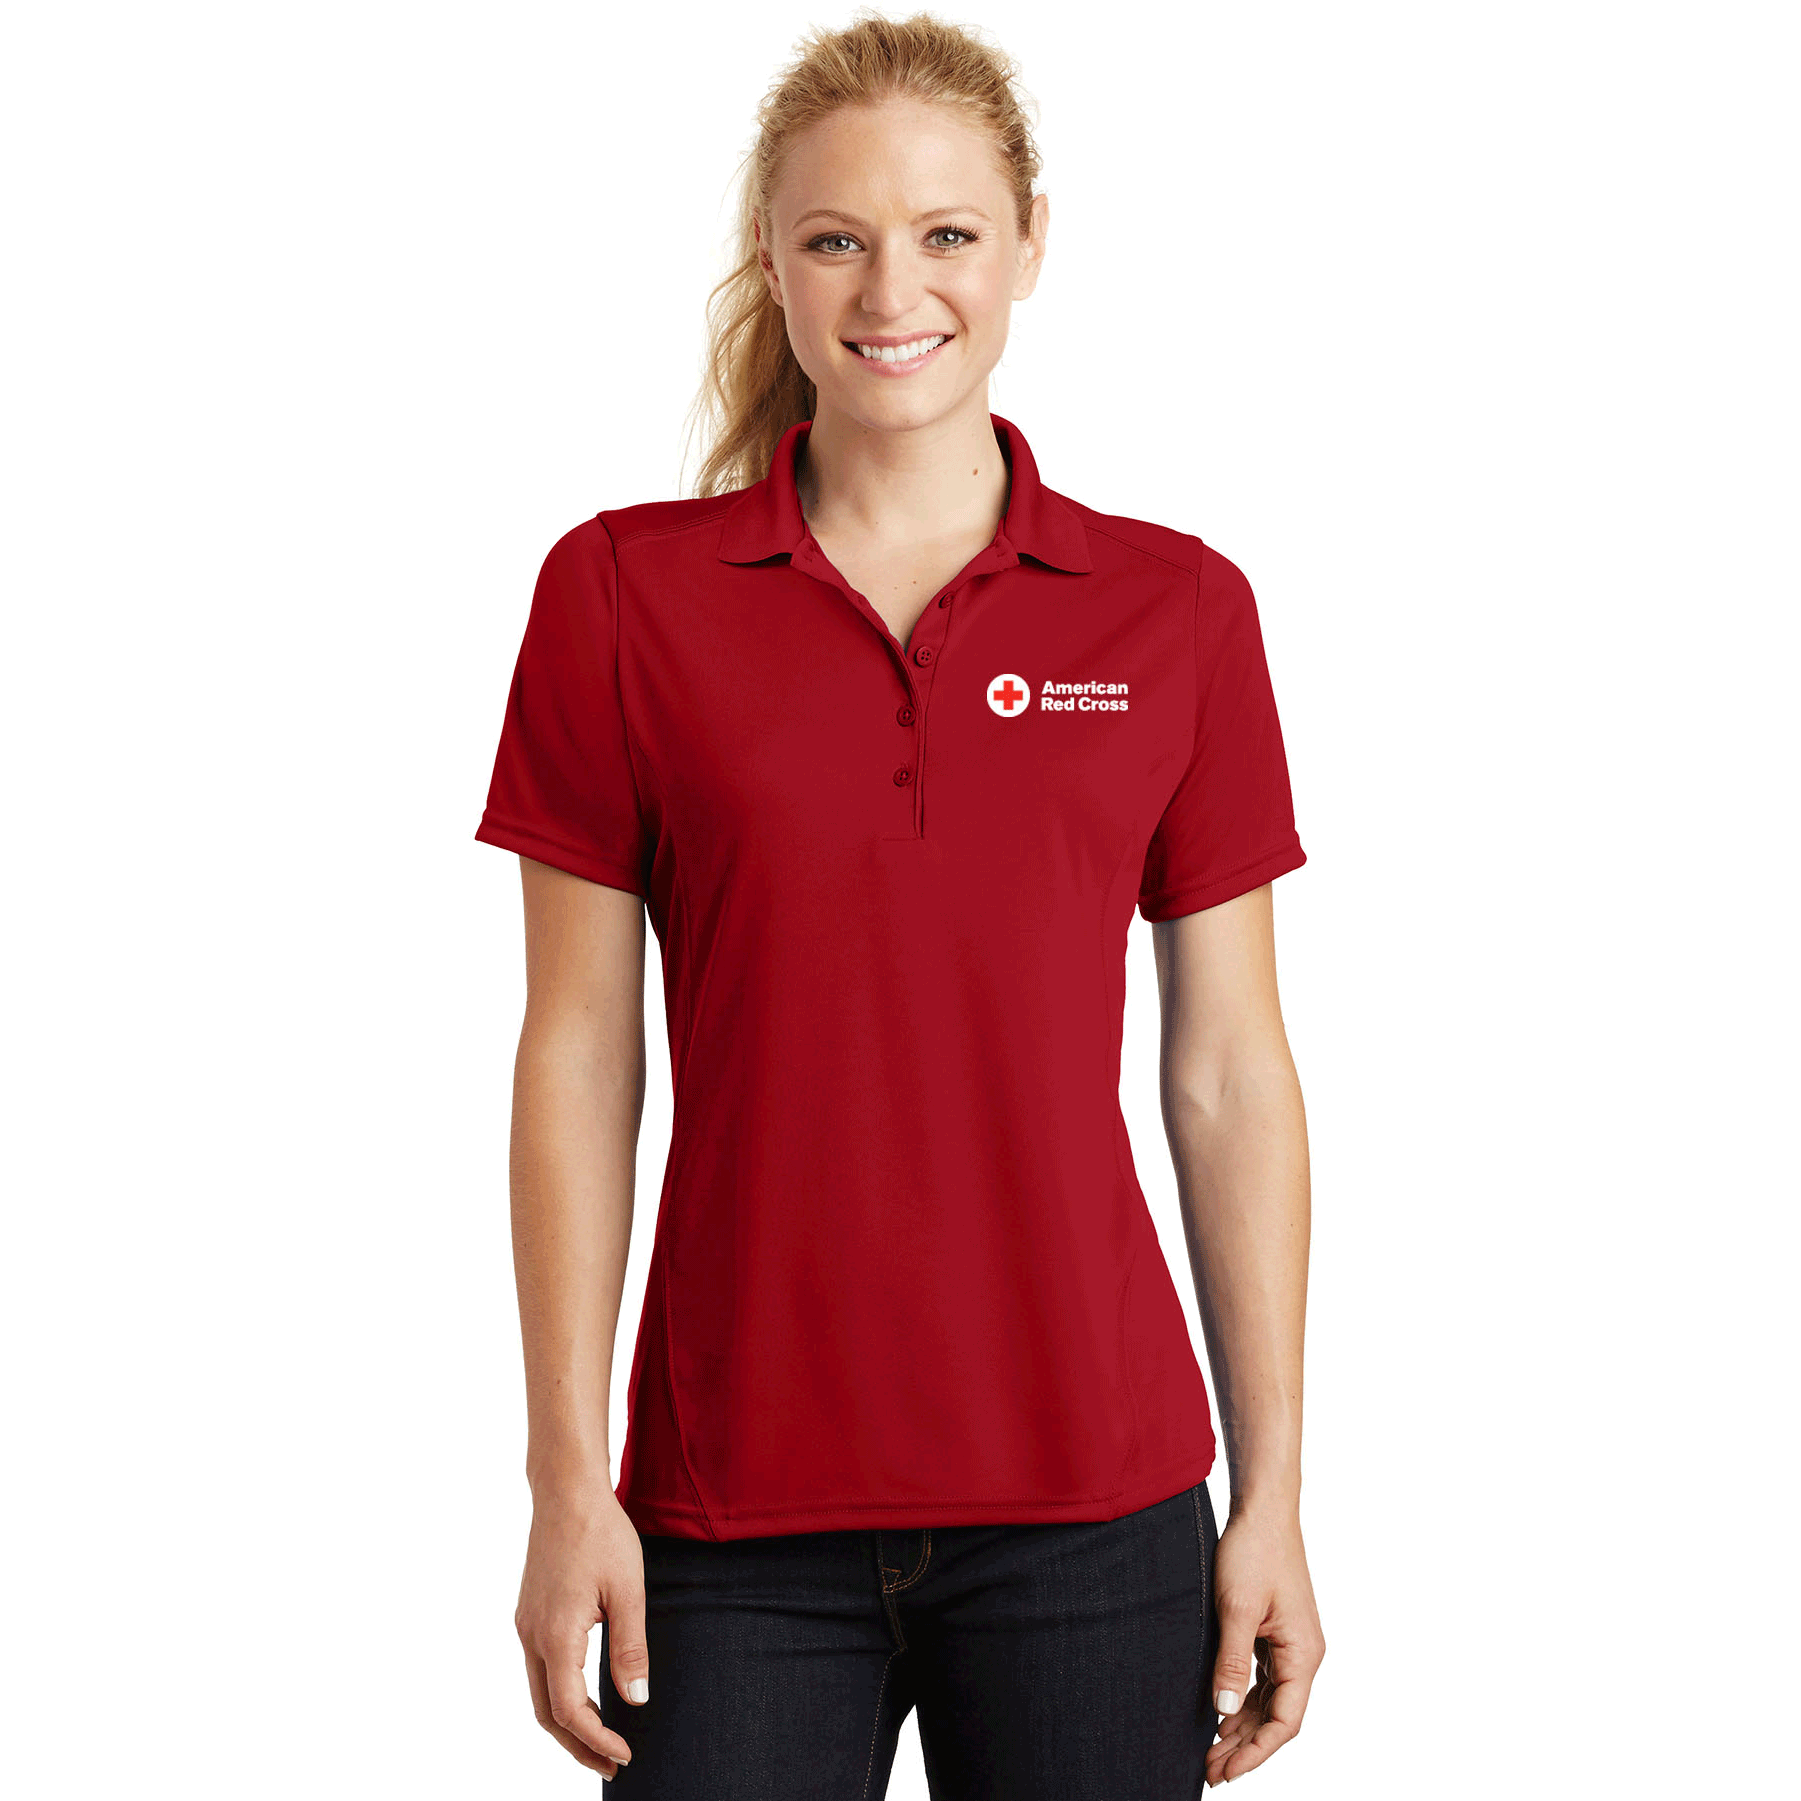 women's red shirt with collar